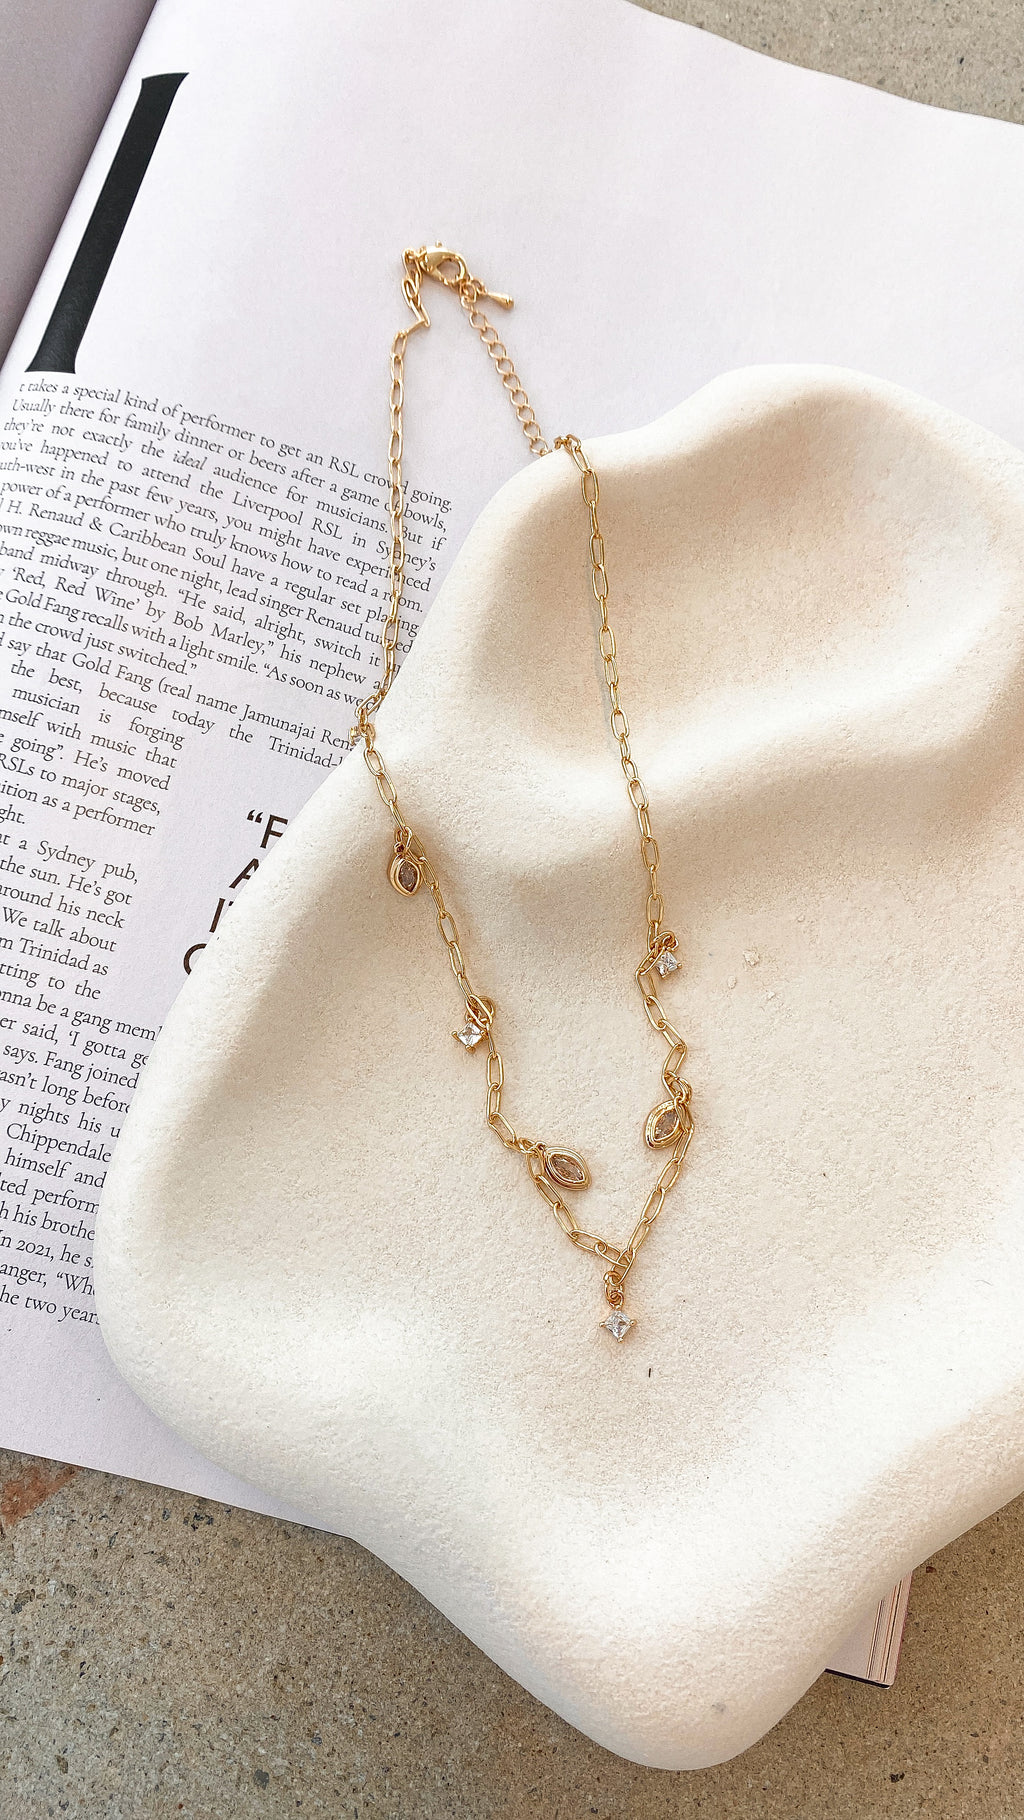 Malery Necklace - Gold